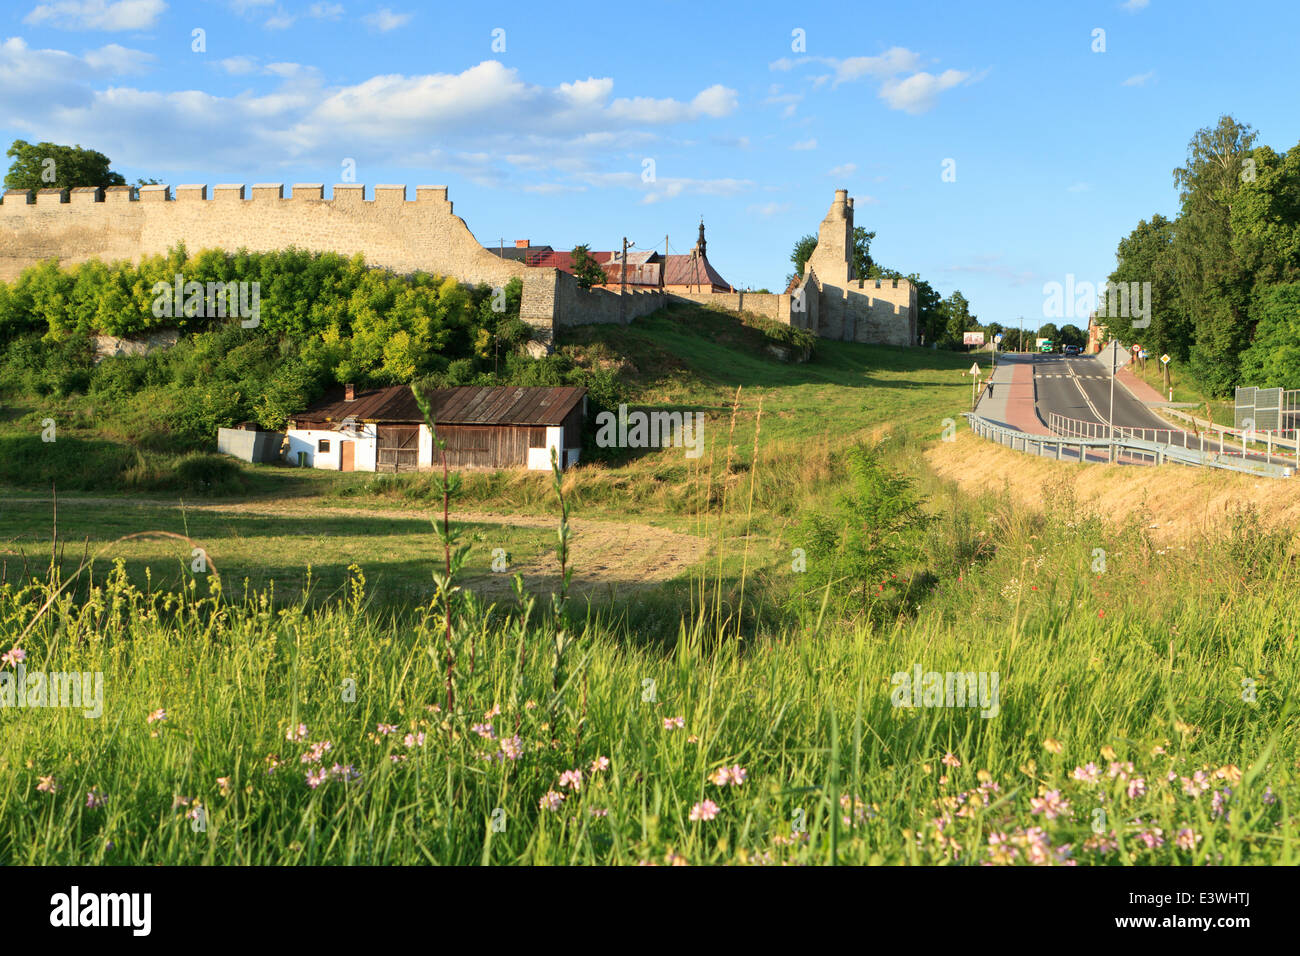 Szydlow - old town with medieval center, ruins of castle and a 700-meter long defensive wall, swietokrzyskie, Poland. Stock Photo